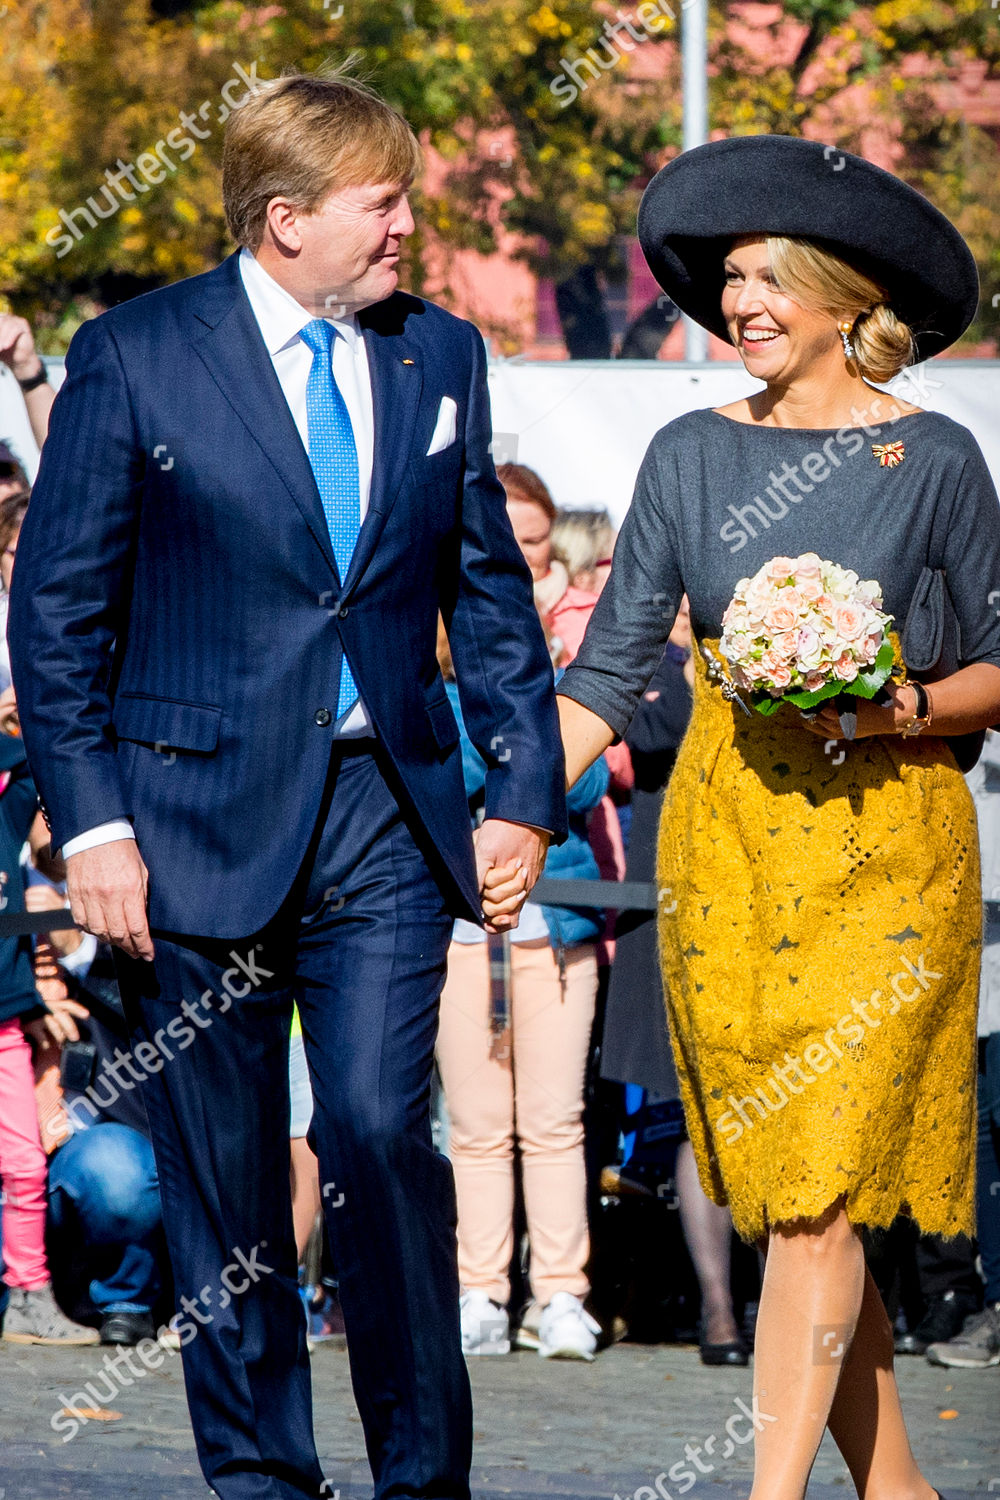 king-willem-alexander-and-queen-maxima-visit-to-germany-shutterstock-editorial-9921319z.jpg